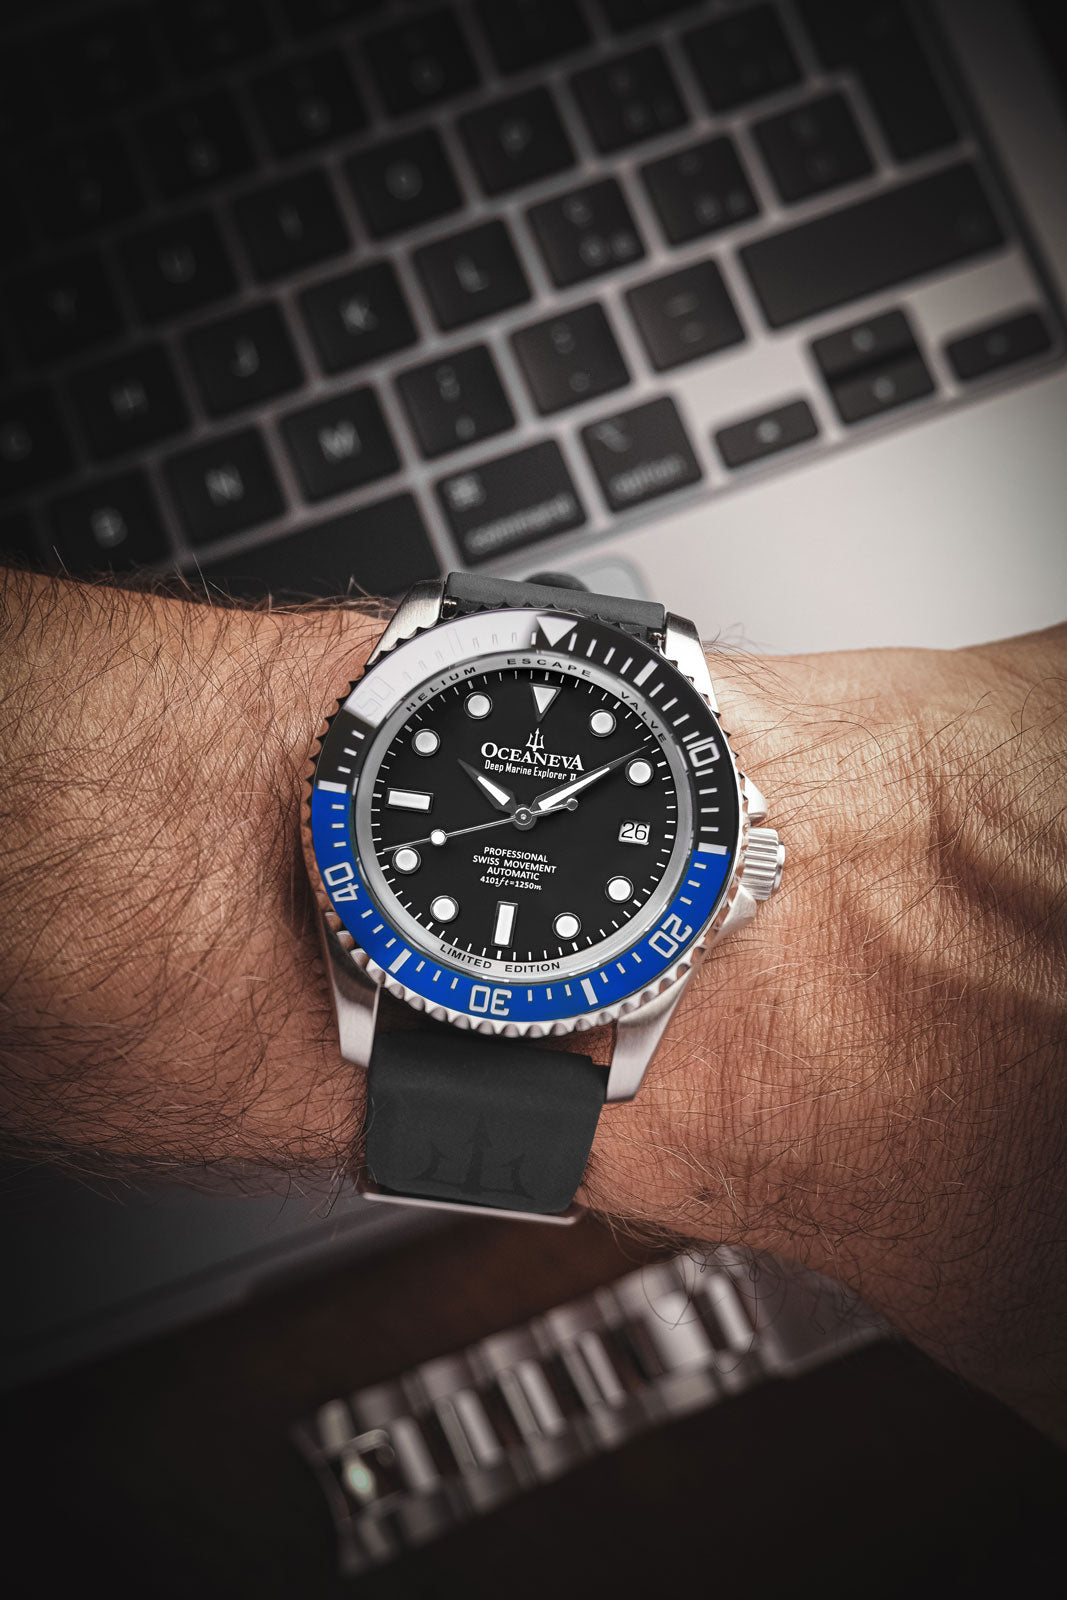 Oceaneva 1250M Dive Watch Blue and Black On Wrist Rubber Strap